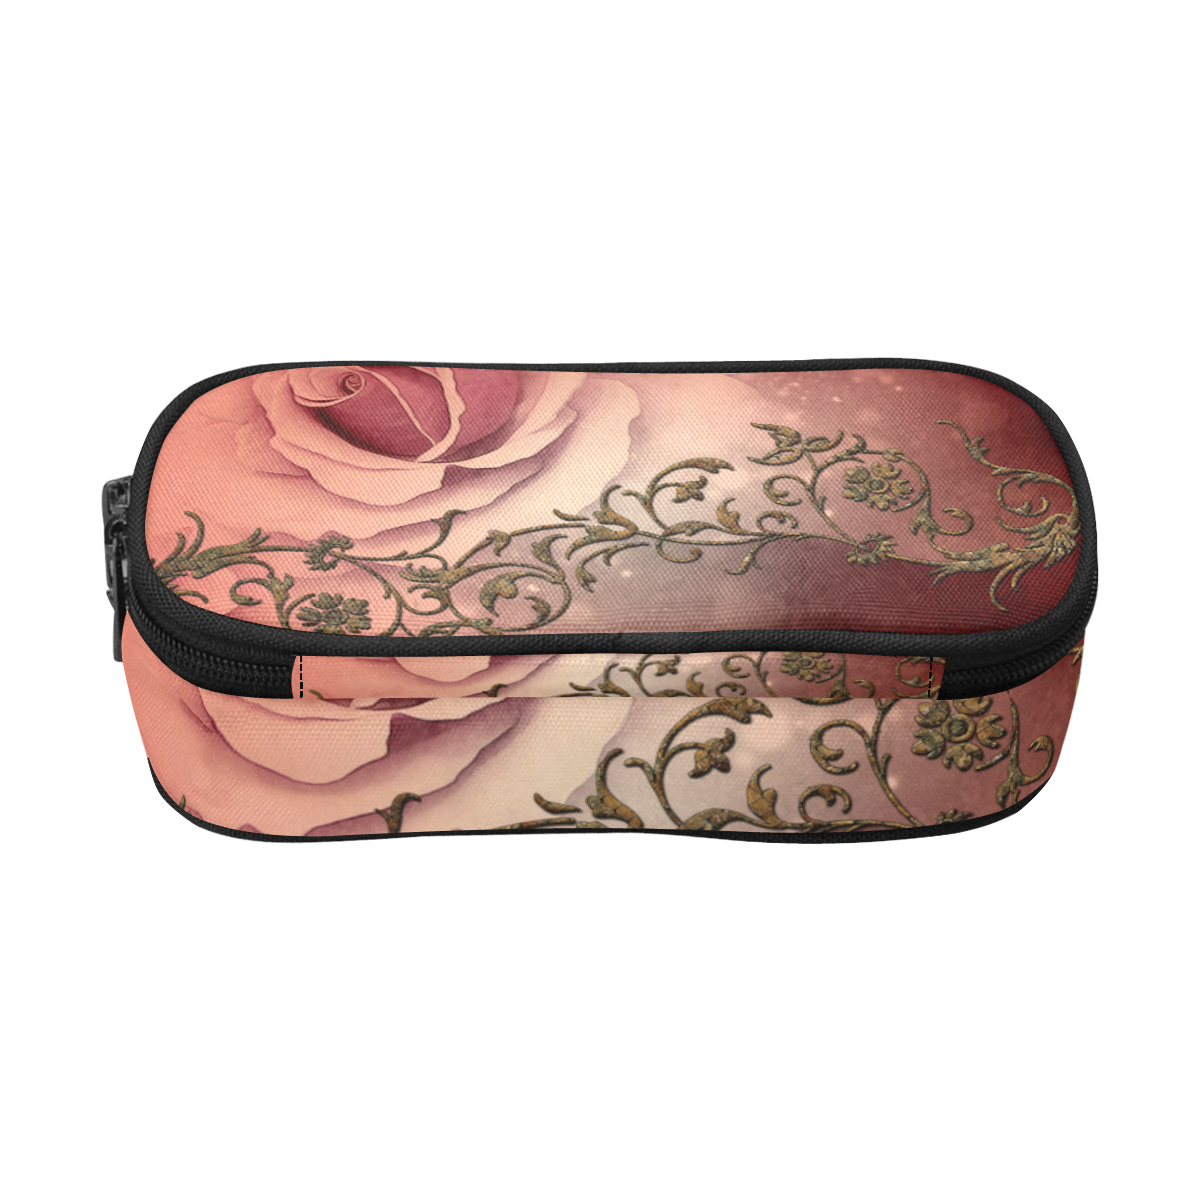 Wonderful roses with floral elements Pencil Pouch/Large (Model 1680)